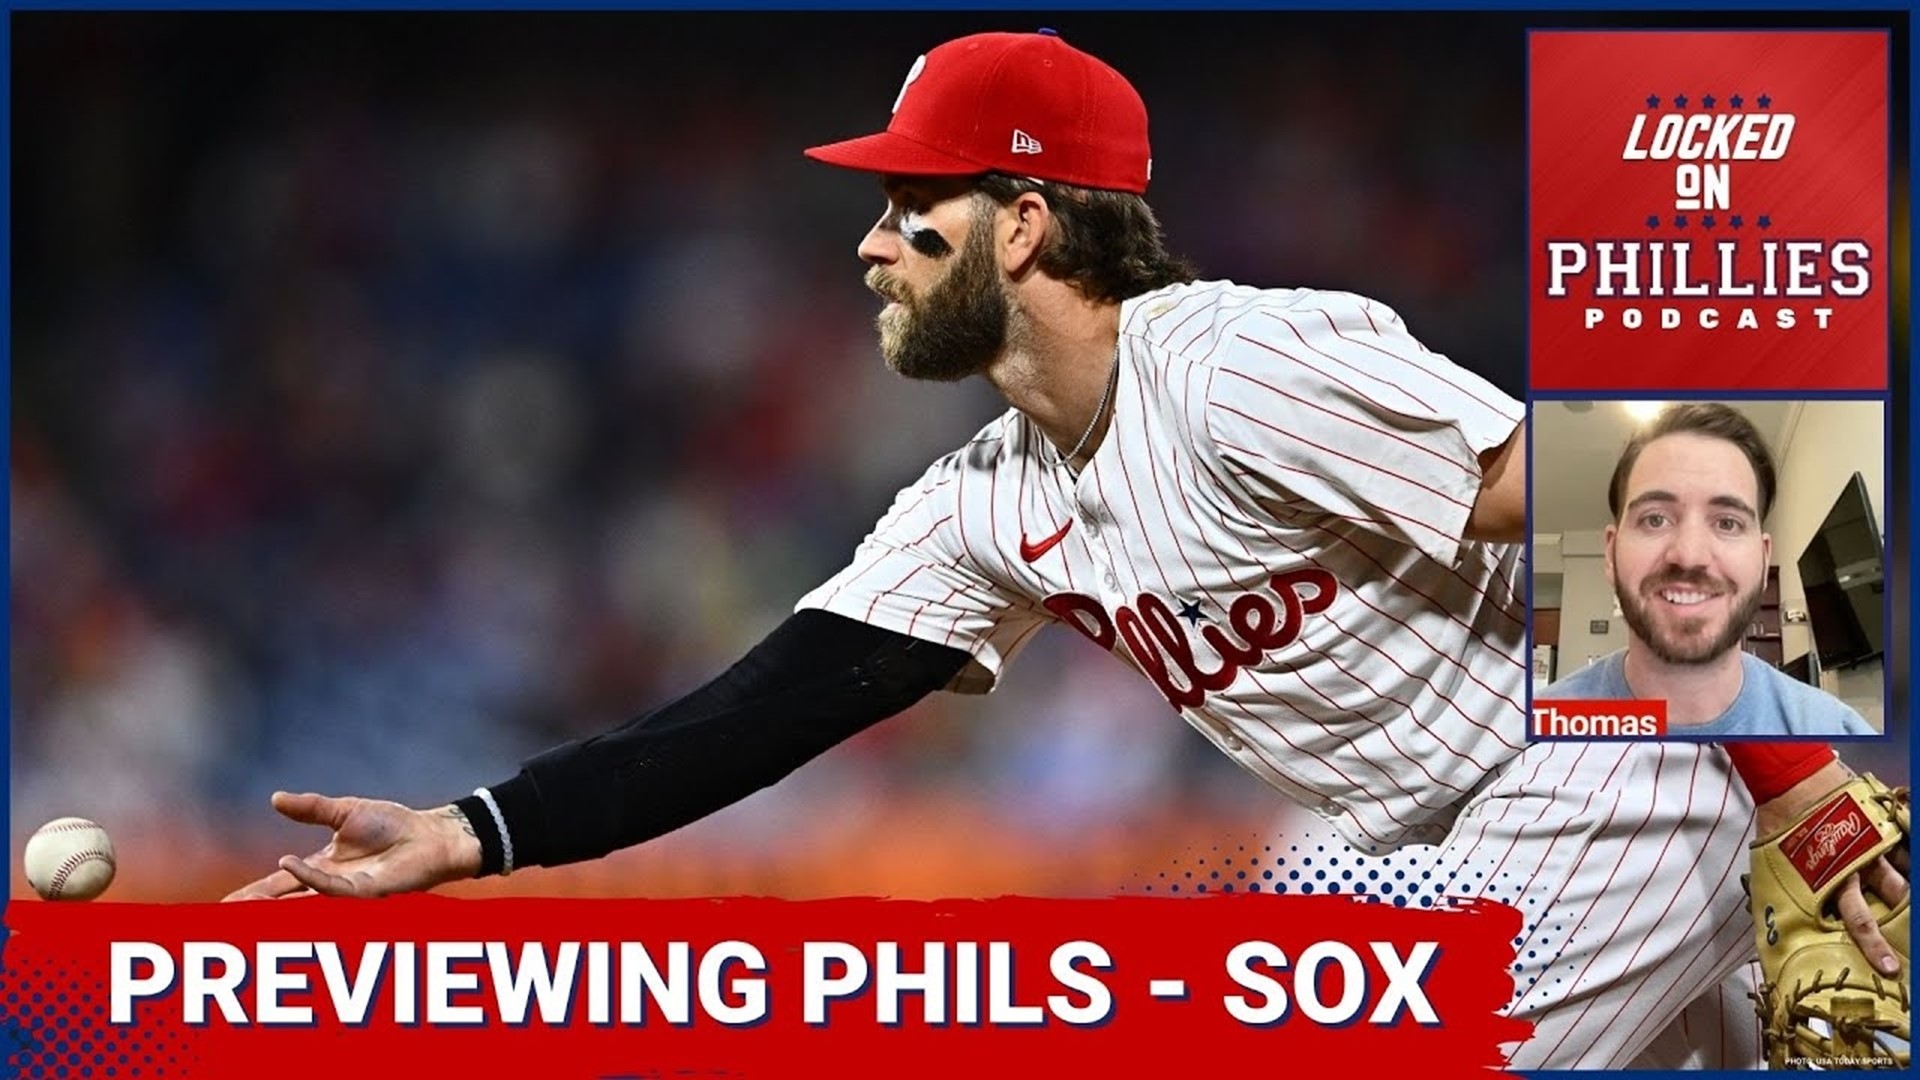 In today's episode, Connor previews the Philadelphia Phillies' weekend series with the Chicago White Sox, and breaks down the big storylines of the series.